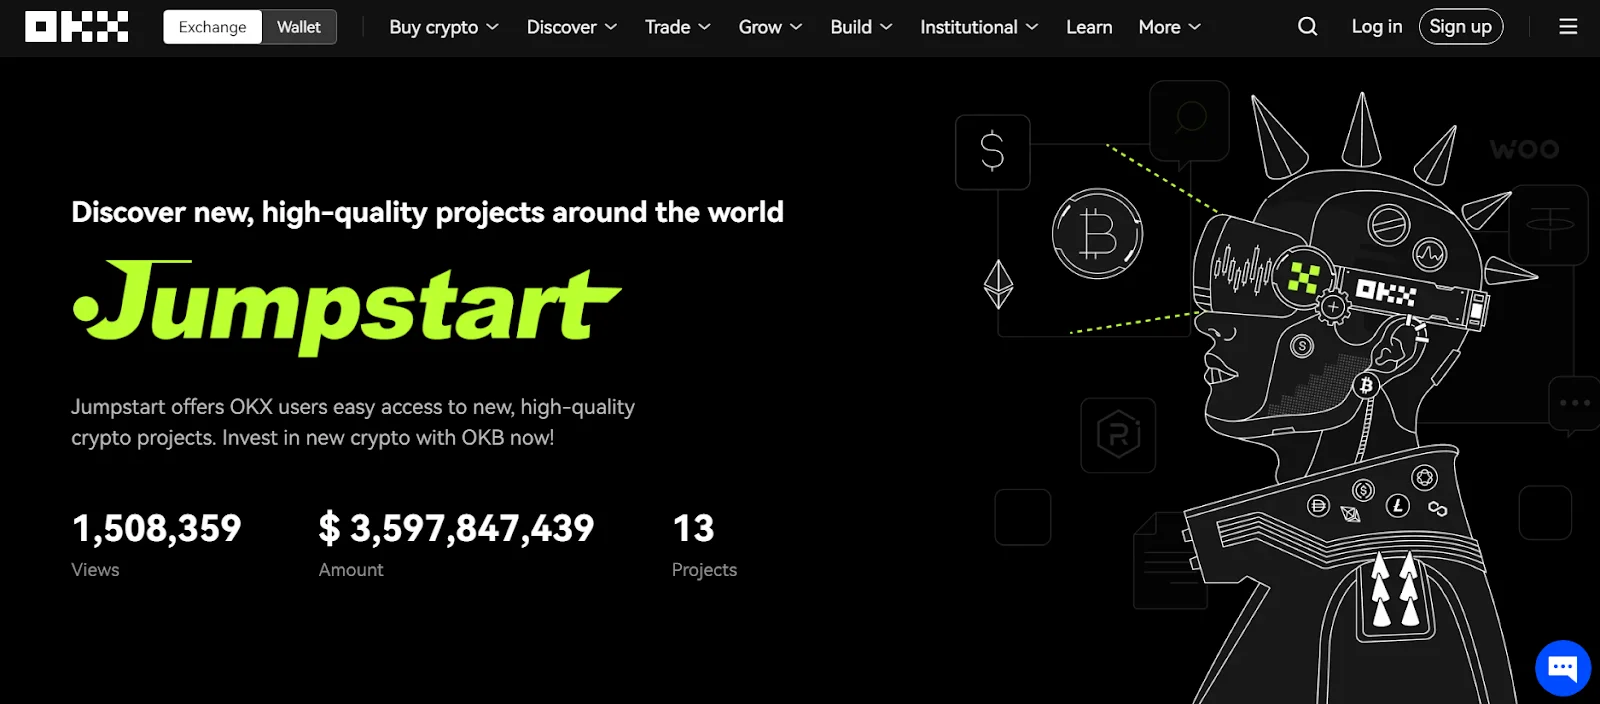 The landing page of OKX Jumpstart, one of the token sales platforms